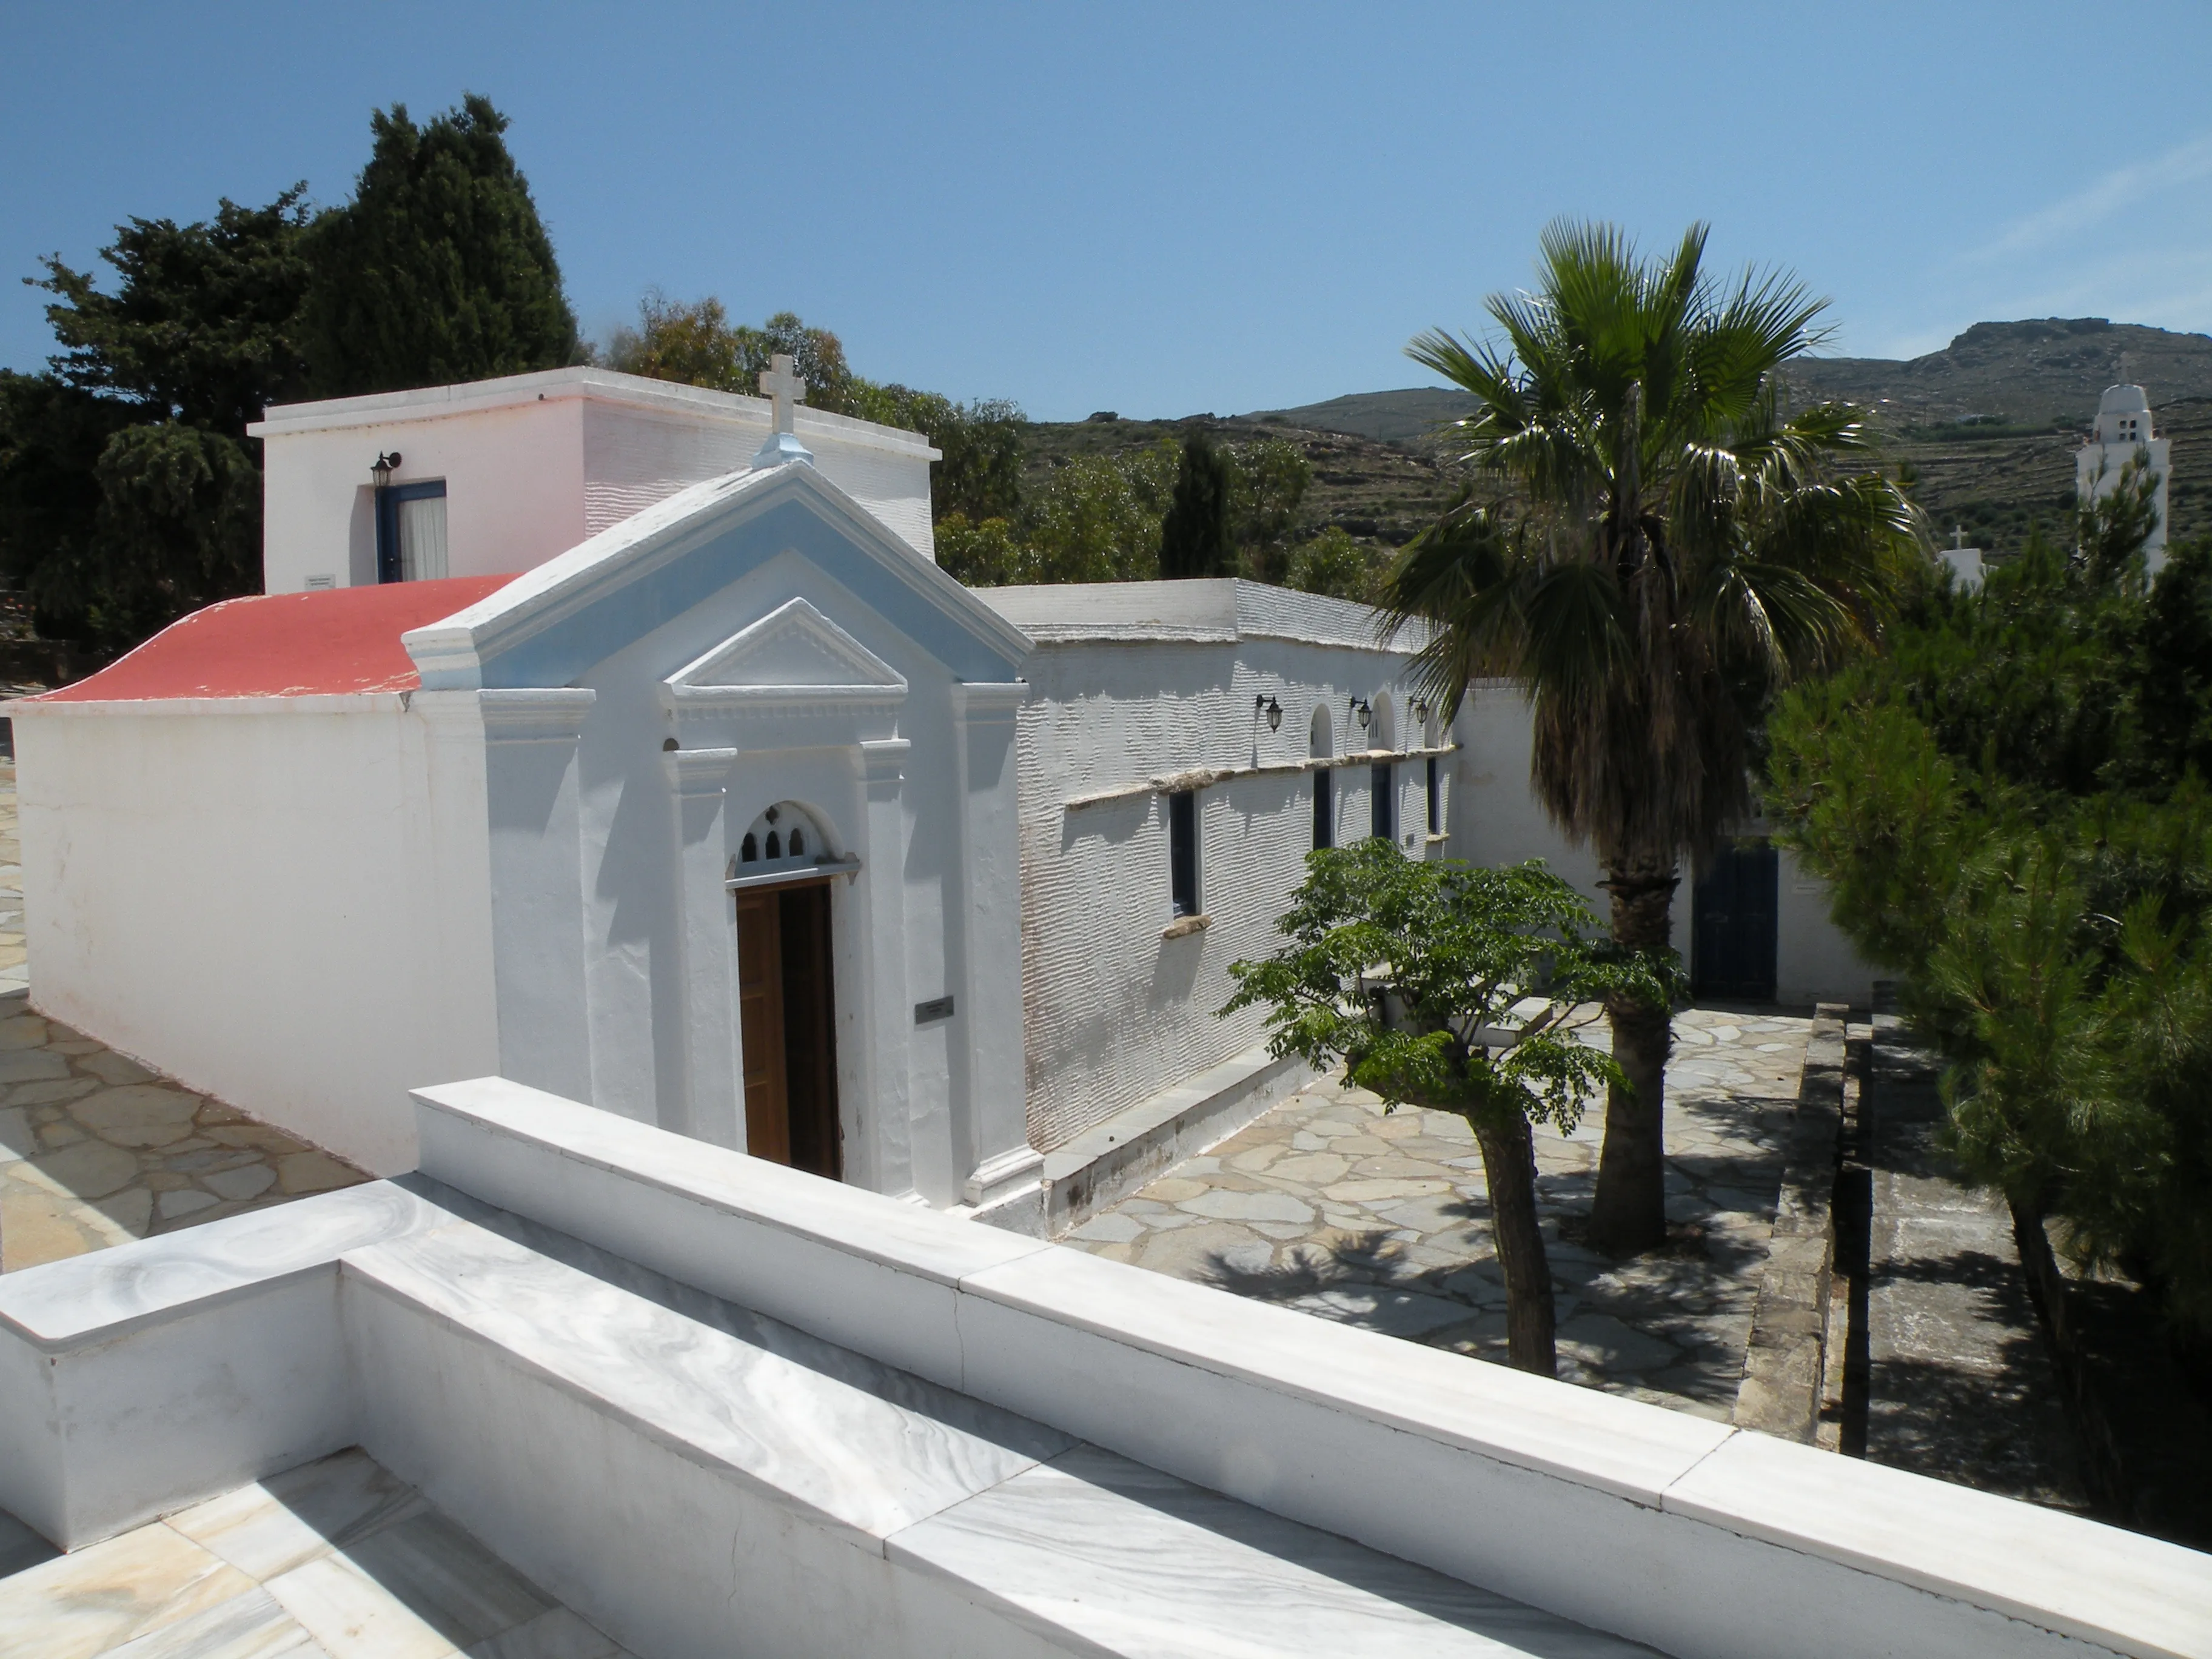 Entrance to the chapel of the Shrine of Vryssi, a Marian pilgrimage on the island of Tinos, Greece.?w=200&h=150